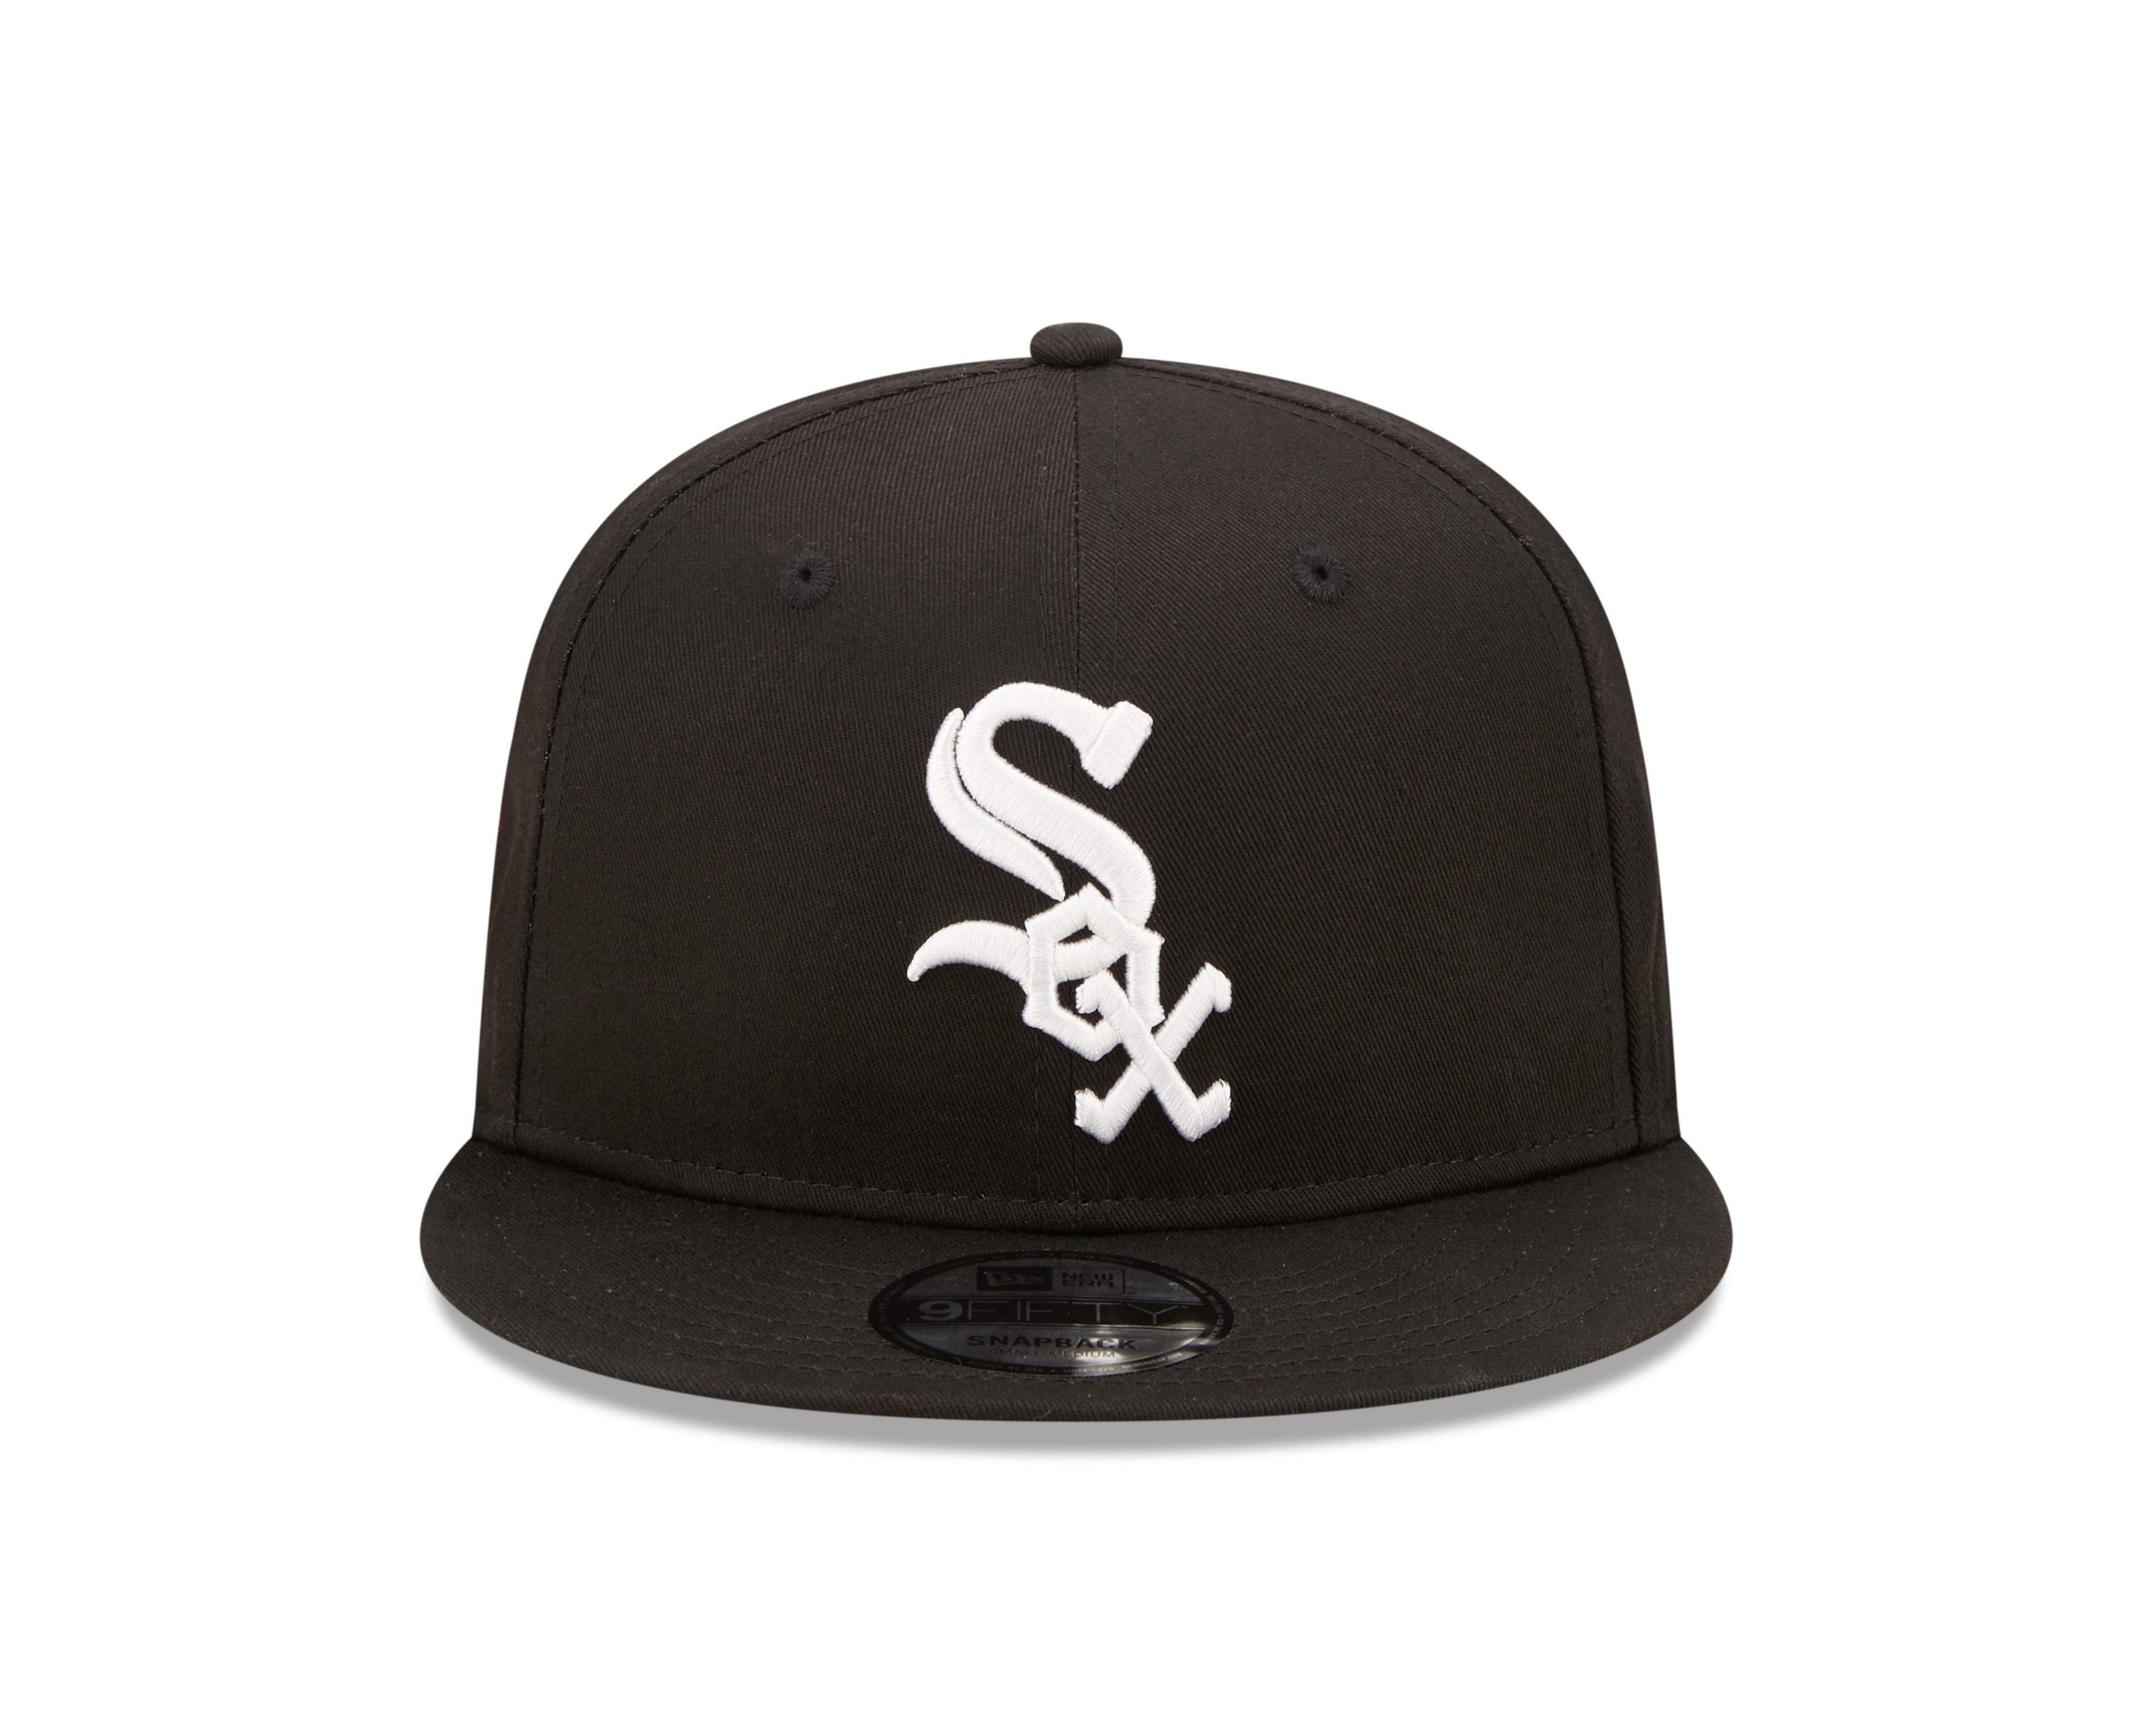 Chicago White Sox MLB 50th Anniversary Sidepatch 9Fifty Snapback Cap Black New Era